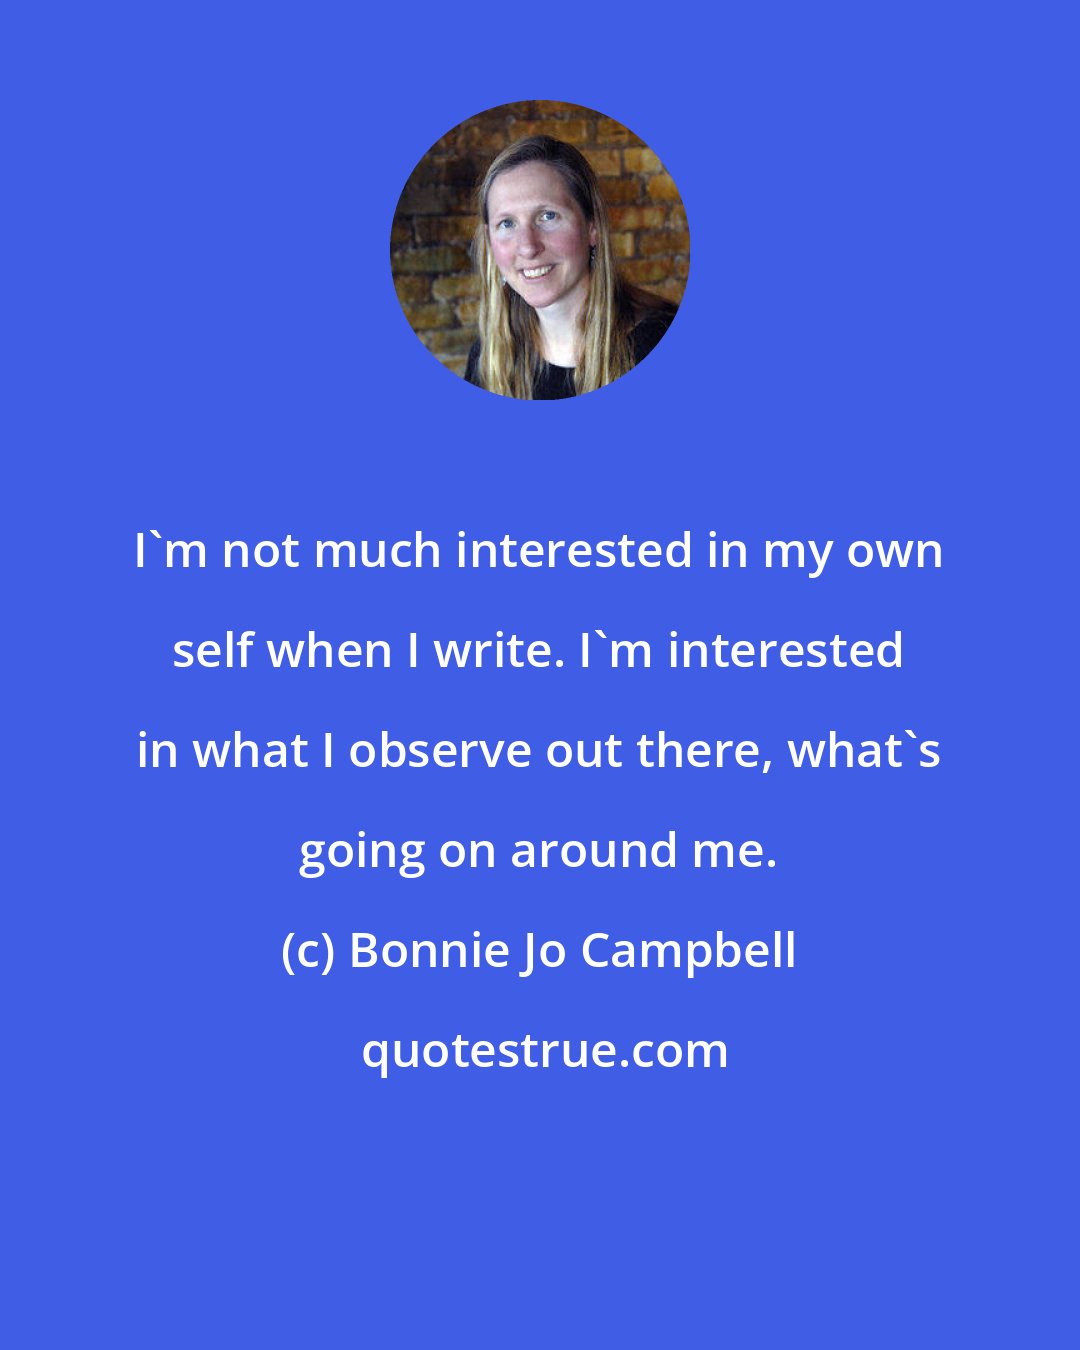 Bonnie Jo Campbell: I'm not much interested in my own self when I write. I'm interested in what I observe out there, what's going on around me.